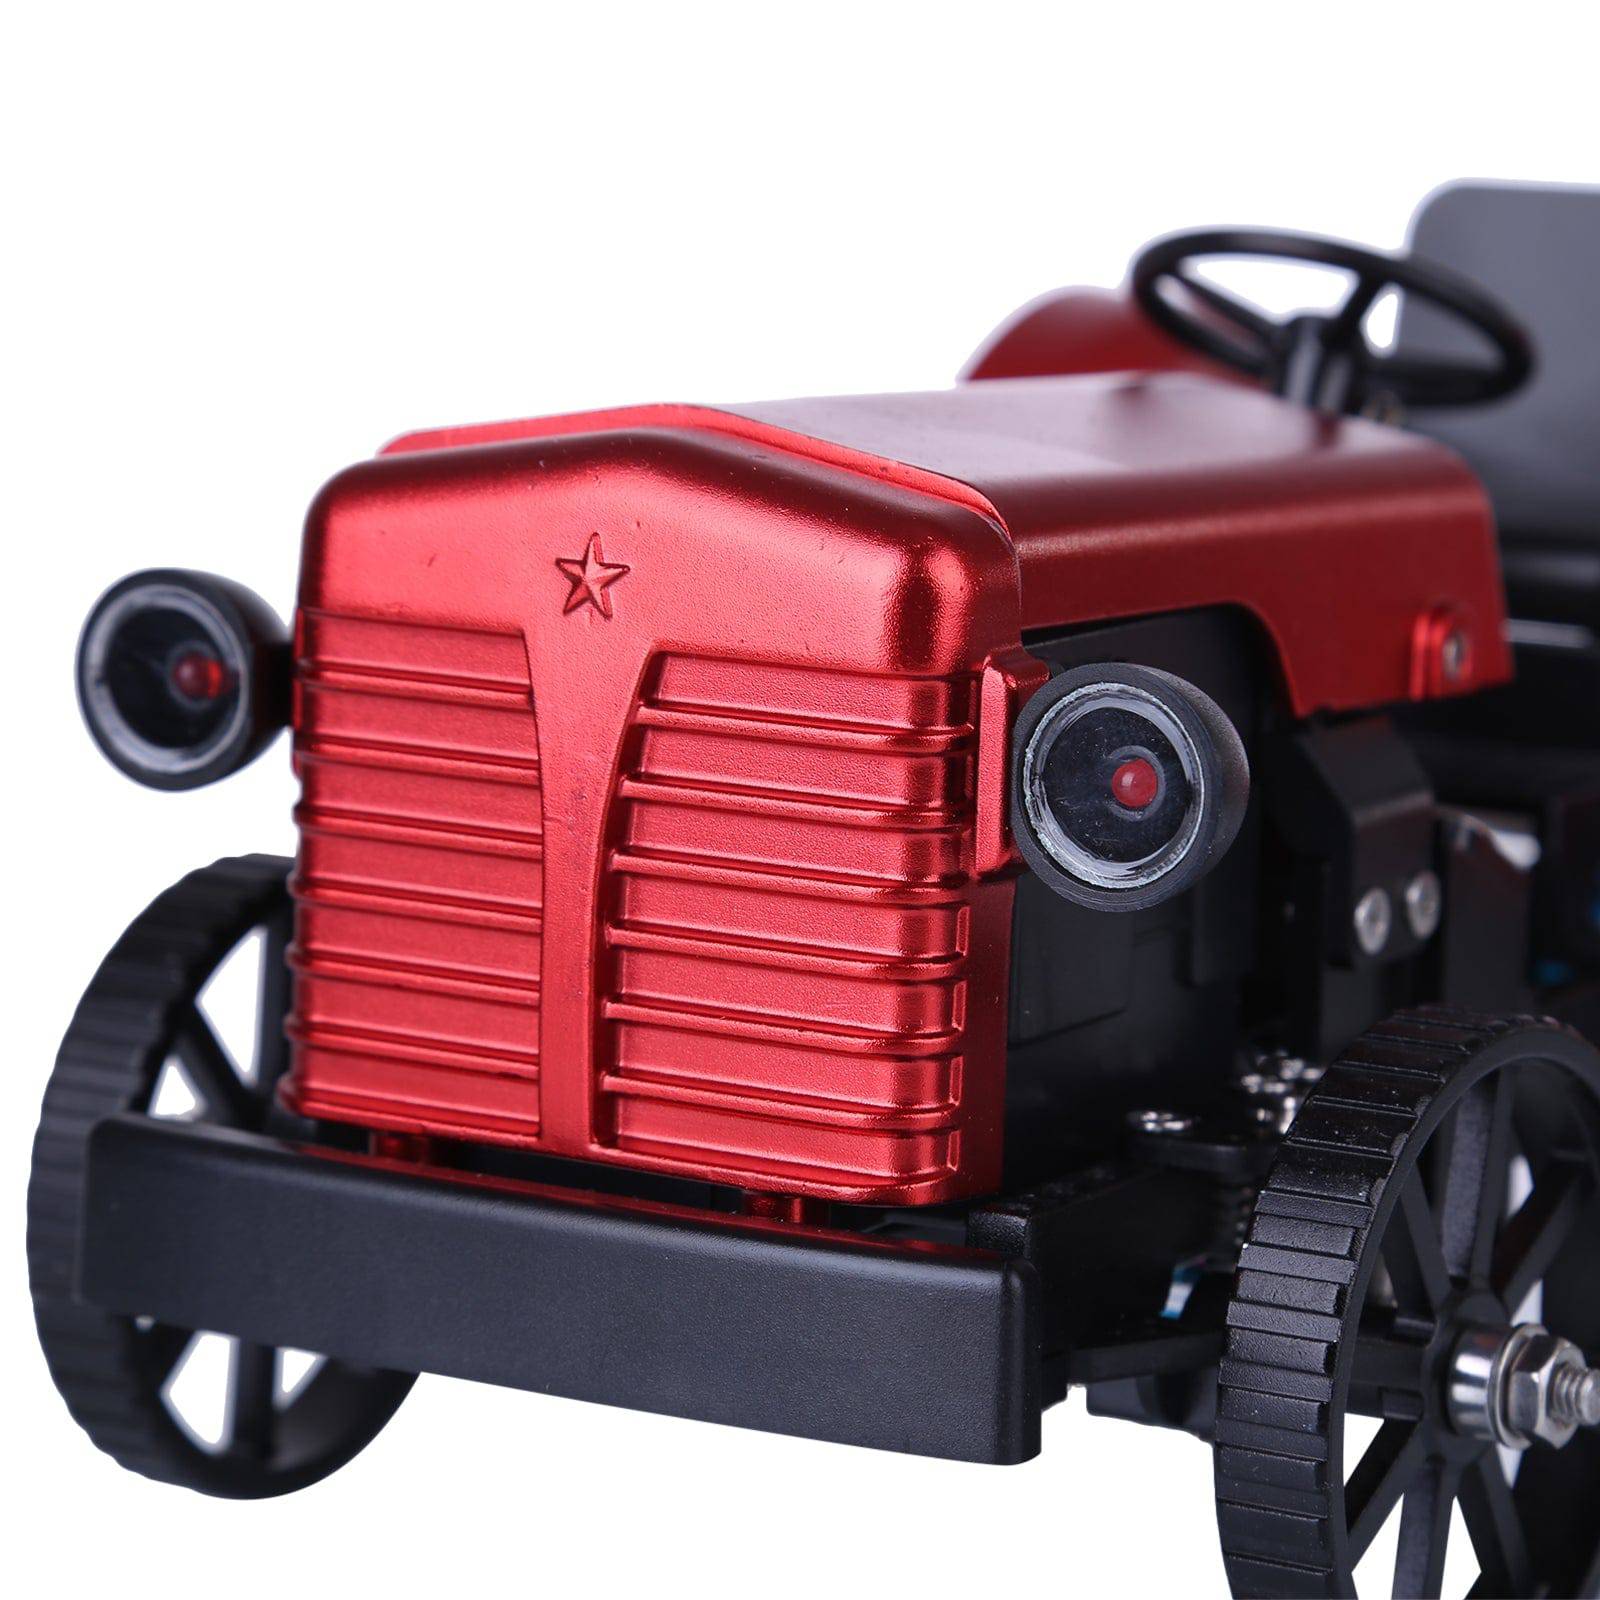 Teching Assembly Simulative Mini APP Controlled Electric Metal Red Tractor Model Toy Gift - stirlingkit